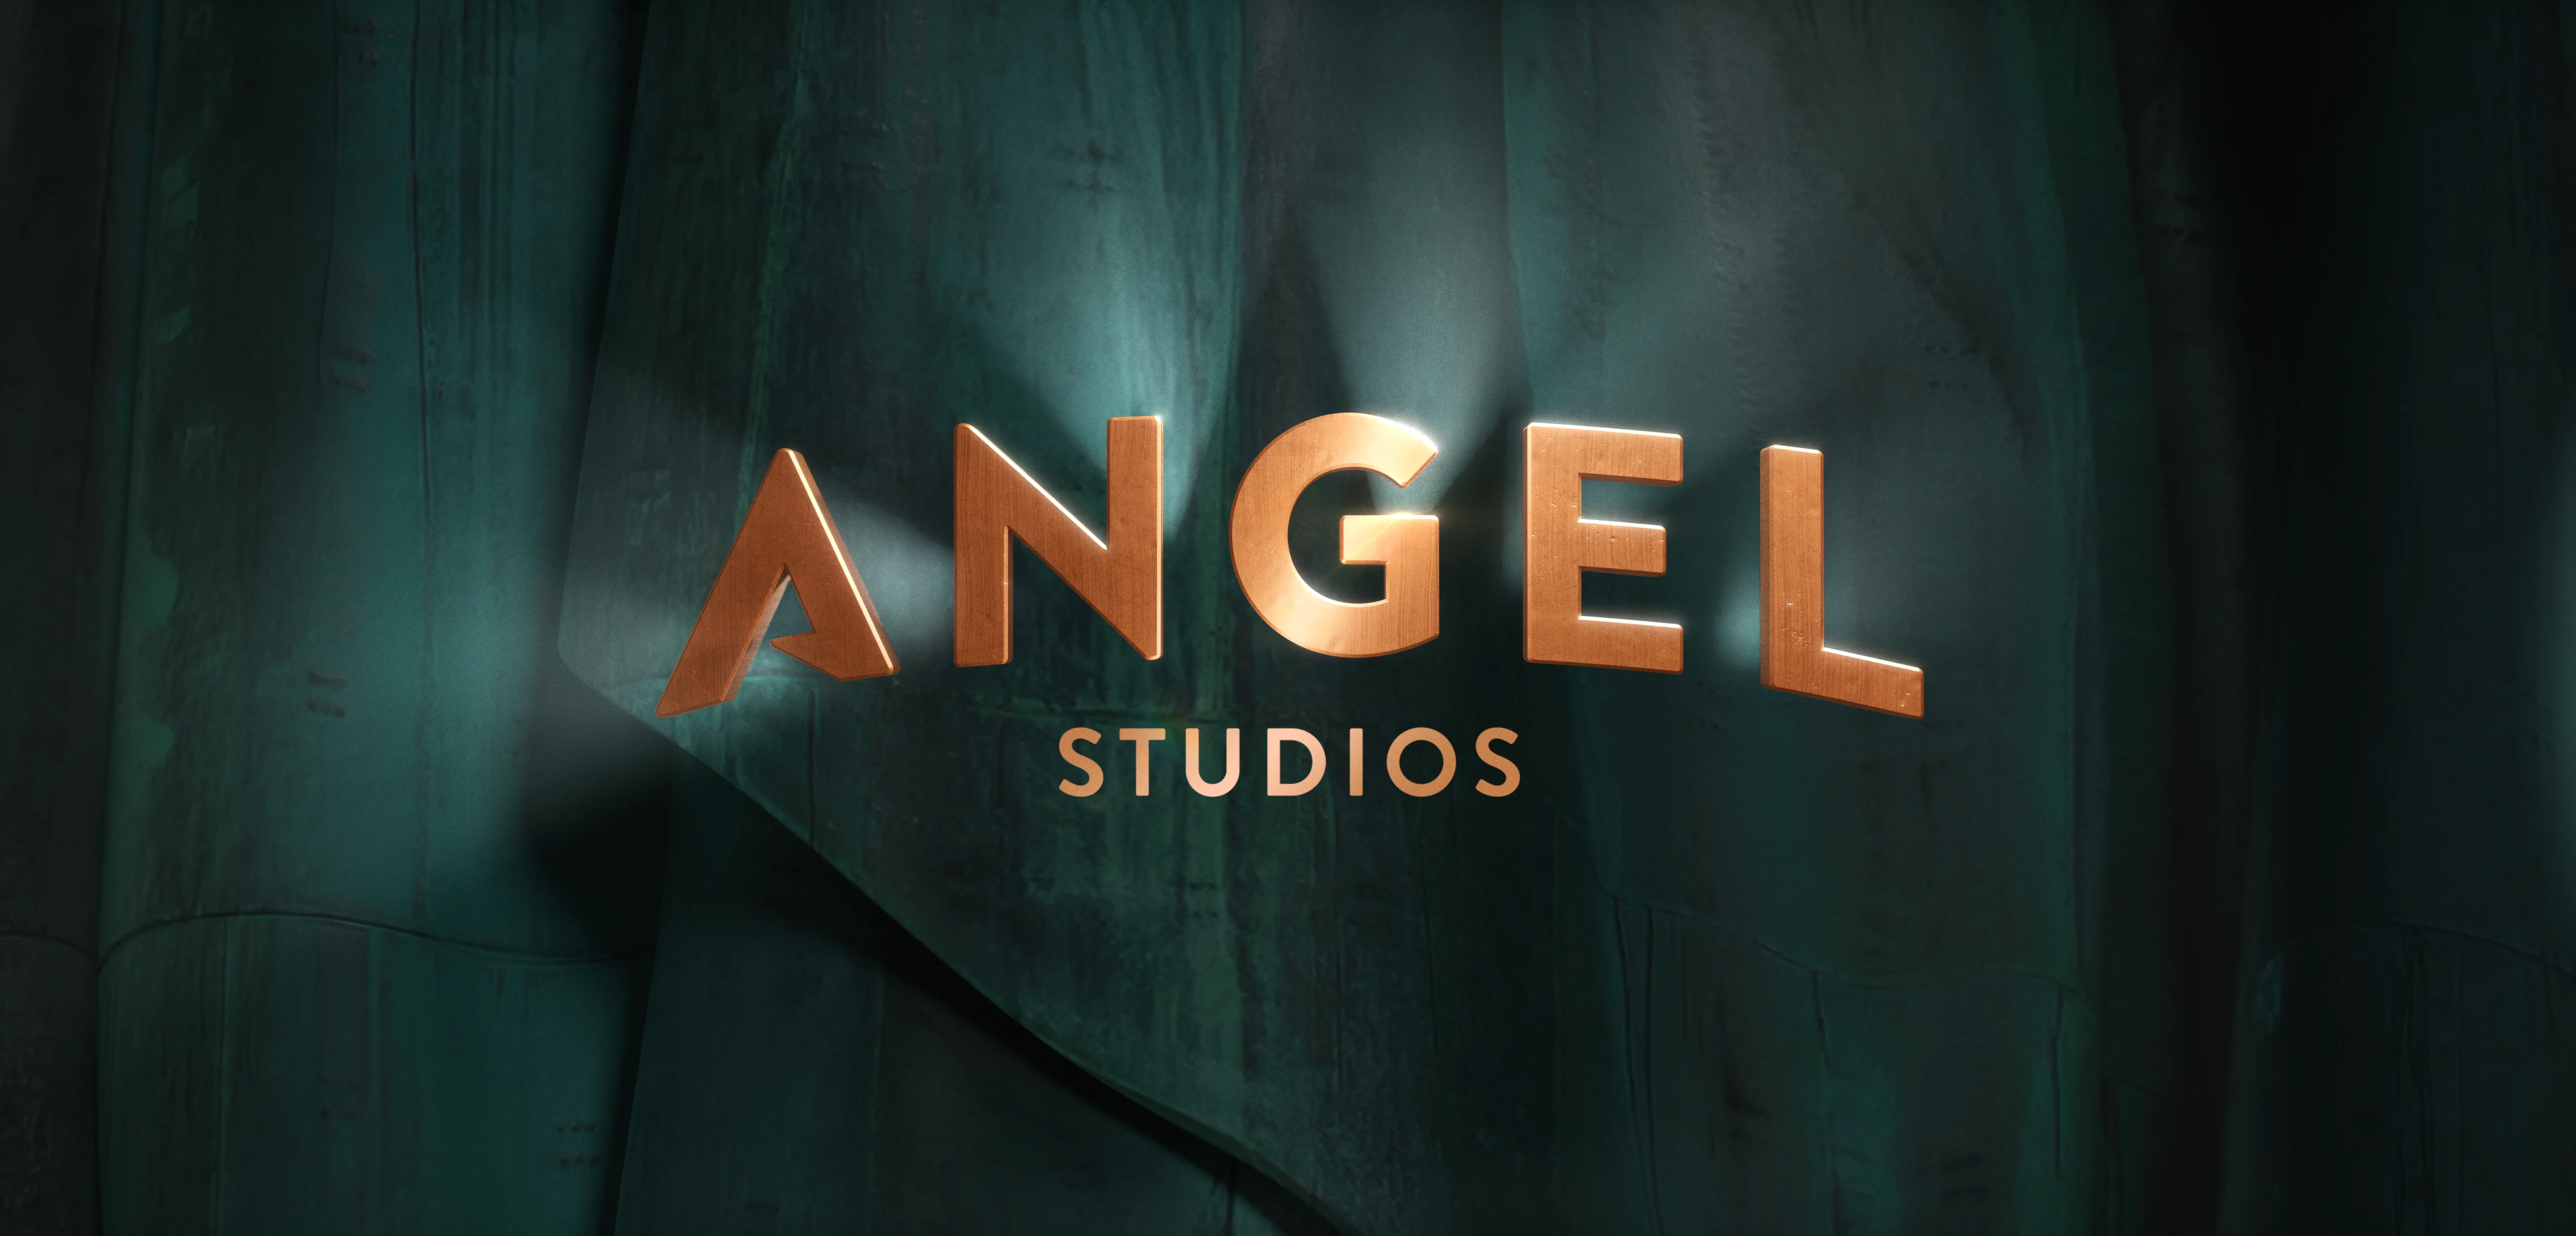 Angel Studios’ Distribution Agreement with The Chosen